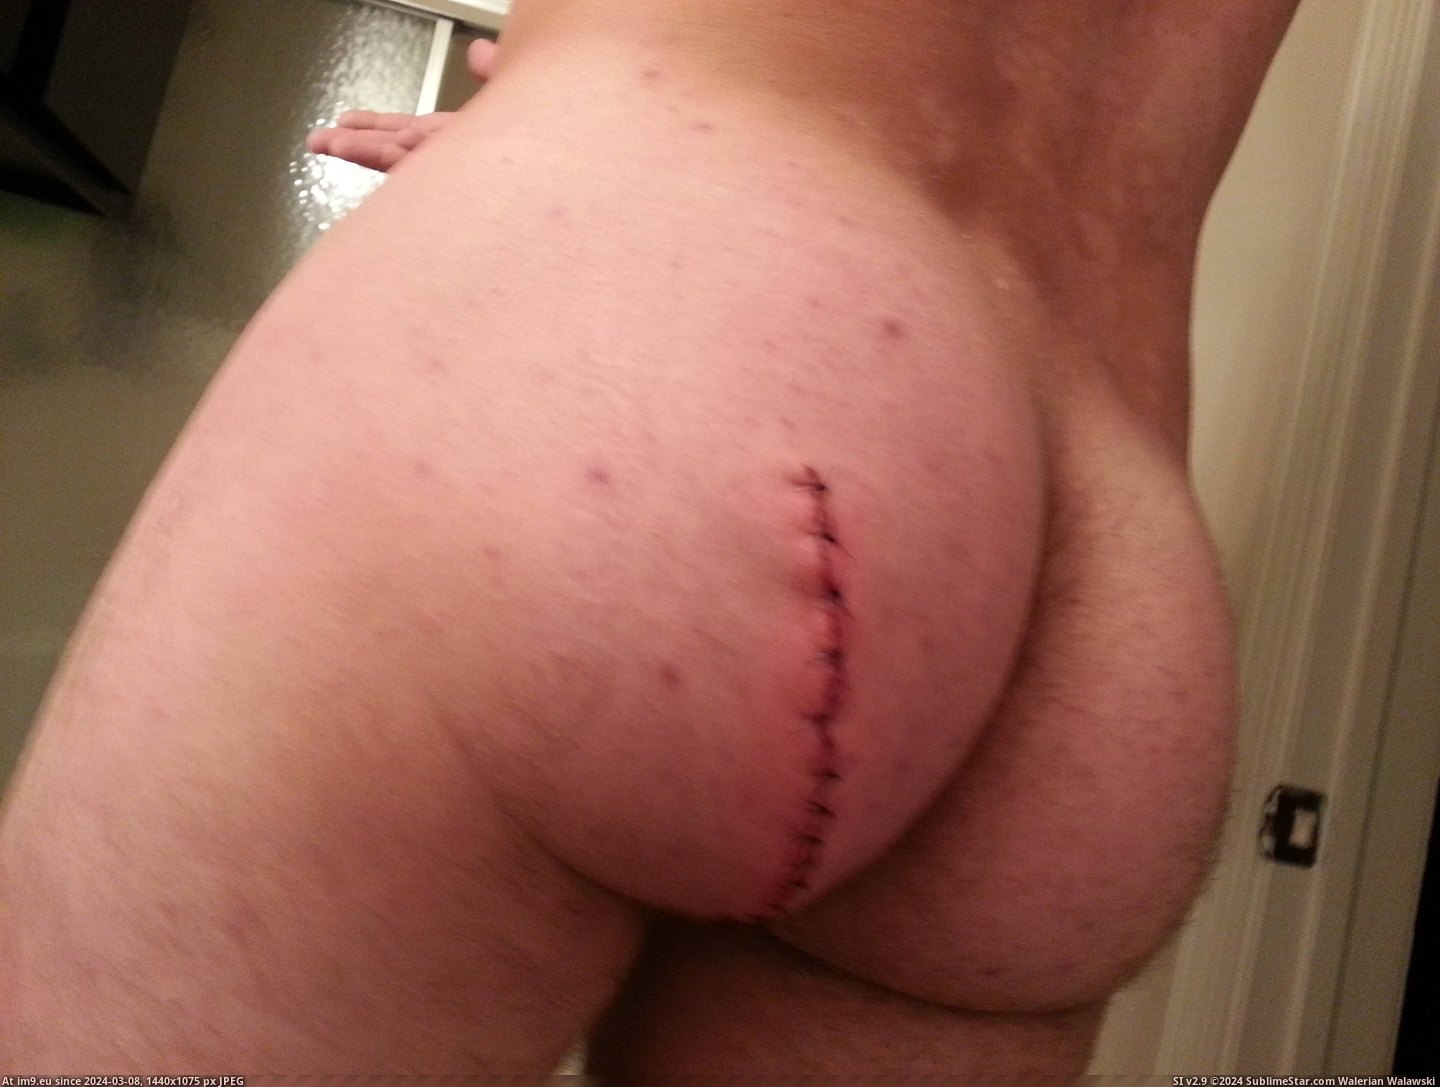 #Ass #Wtf #Got #Off #Ladder #Stepped #Latch #Piece #Caught #Door #Steel [Wtf] My ass got caught on a piece of steel on a door latch as I stepped off a ladder. 3 Pic. (Image of album My r/WTF favs))